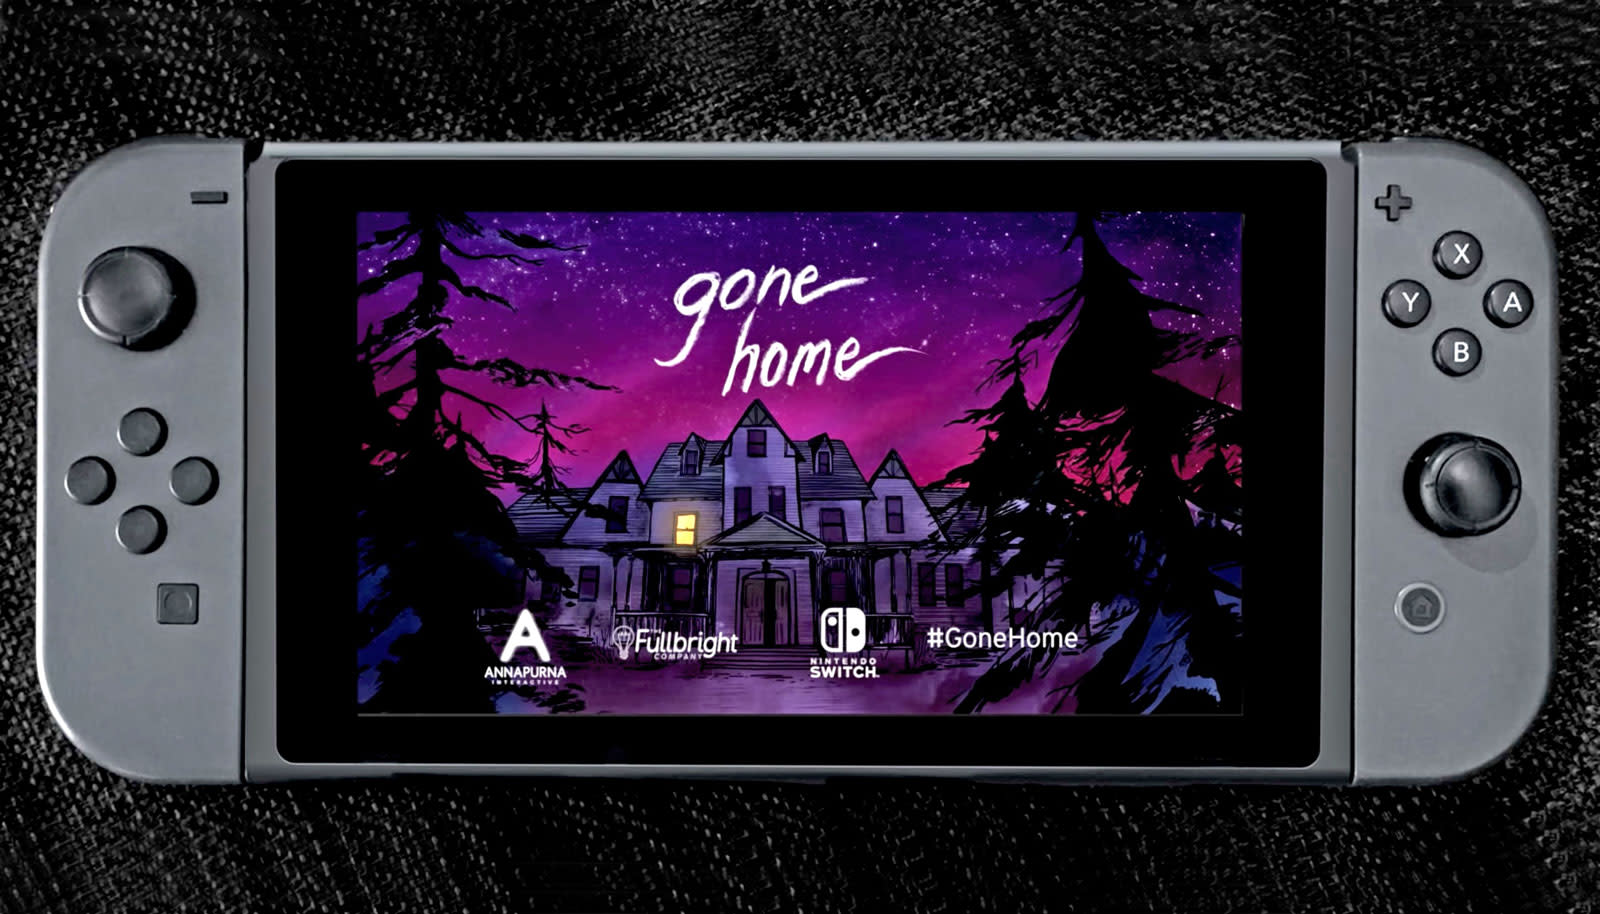 Come home game. Gone Home игра ps4. Nintendo Switch дом. Gone Home - Console Edition. Fullbright (Company) игры.